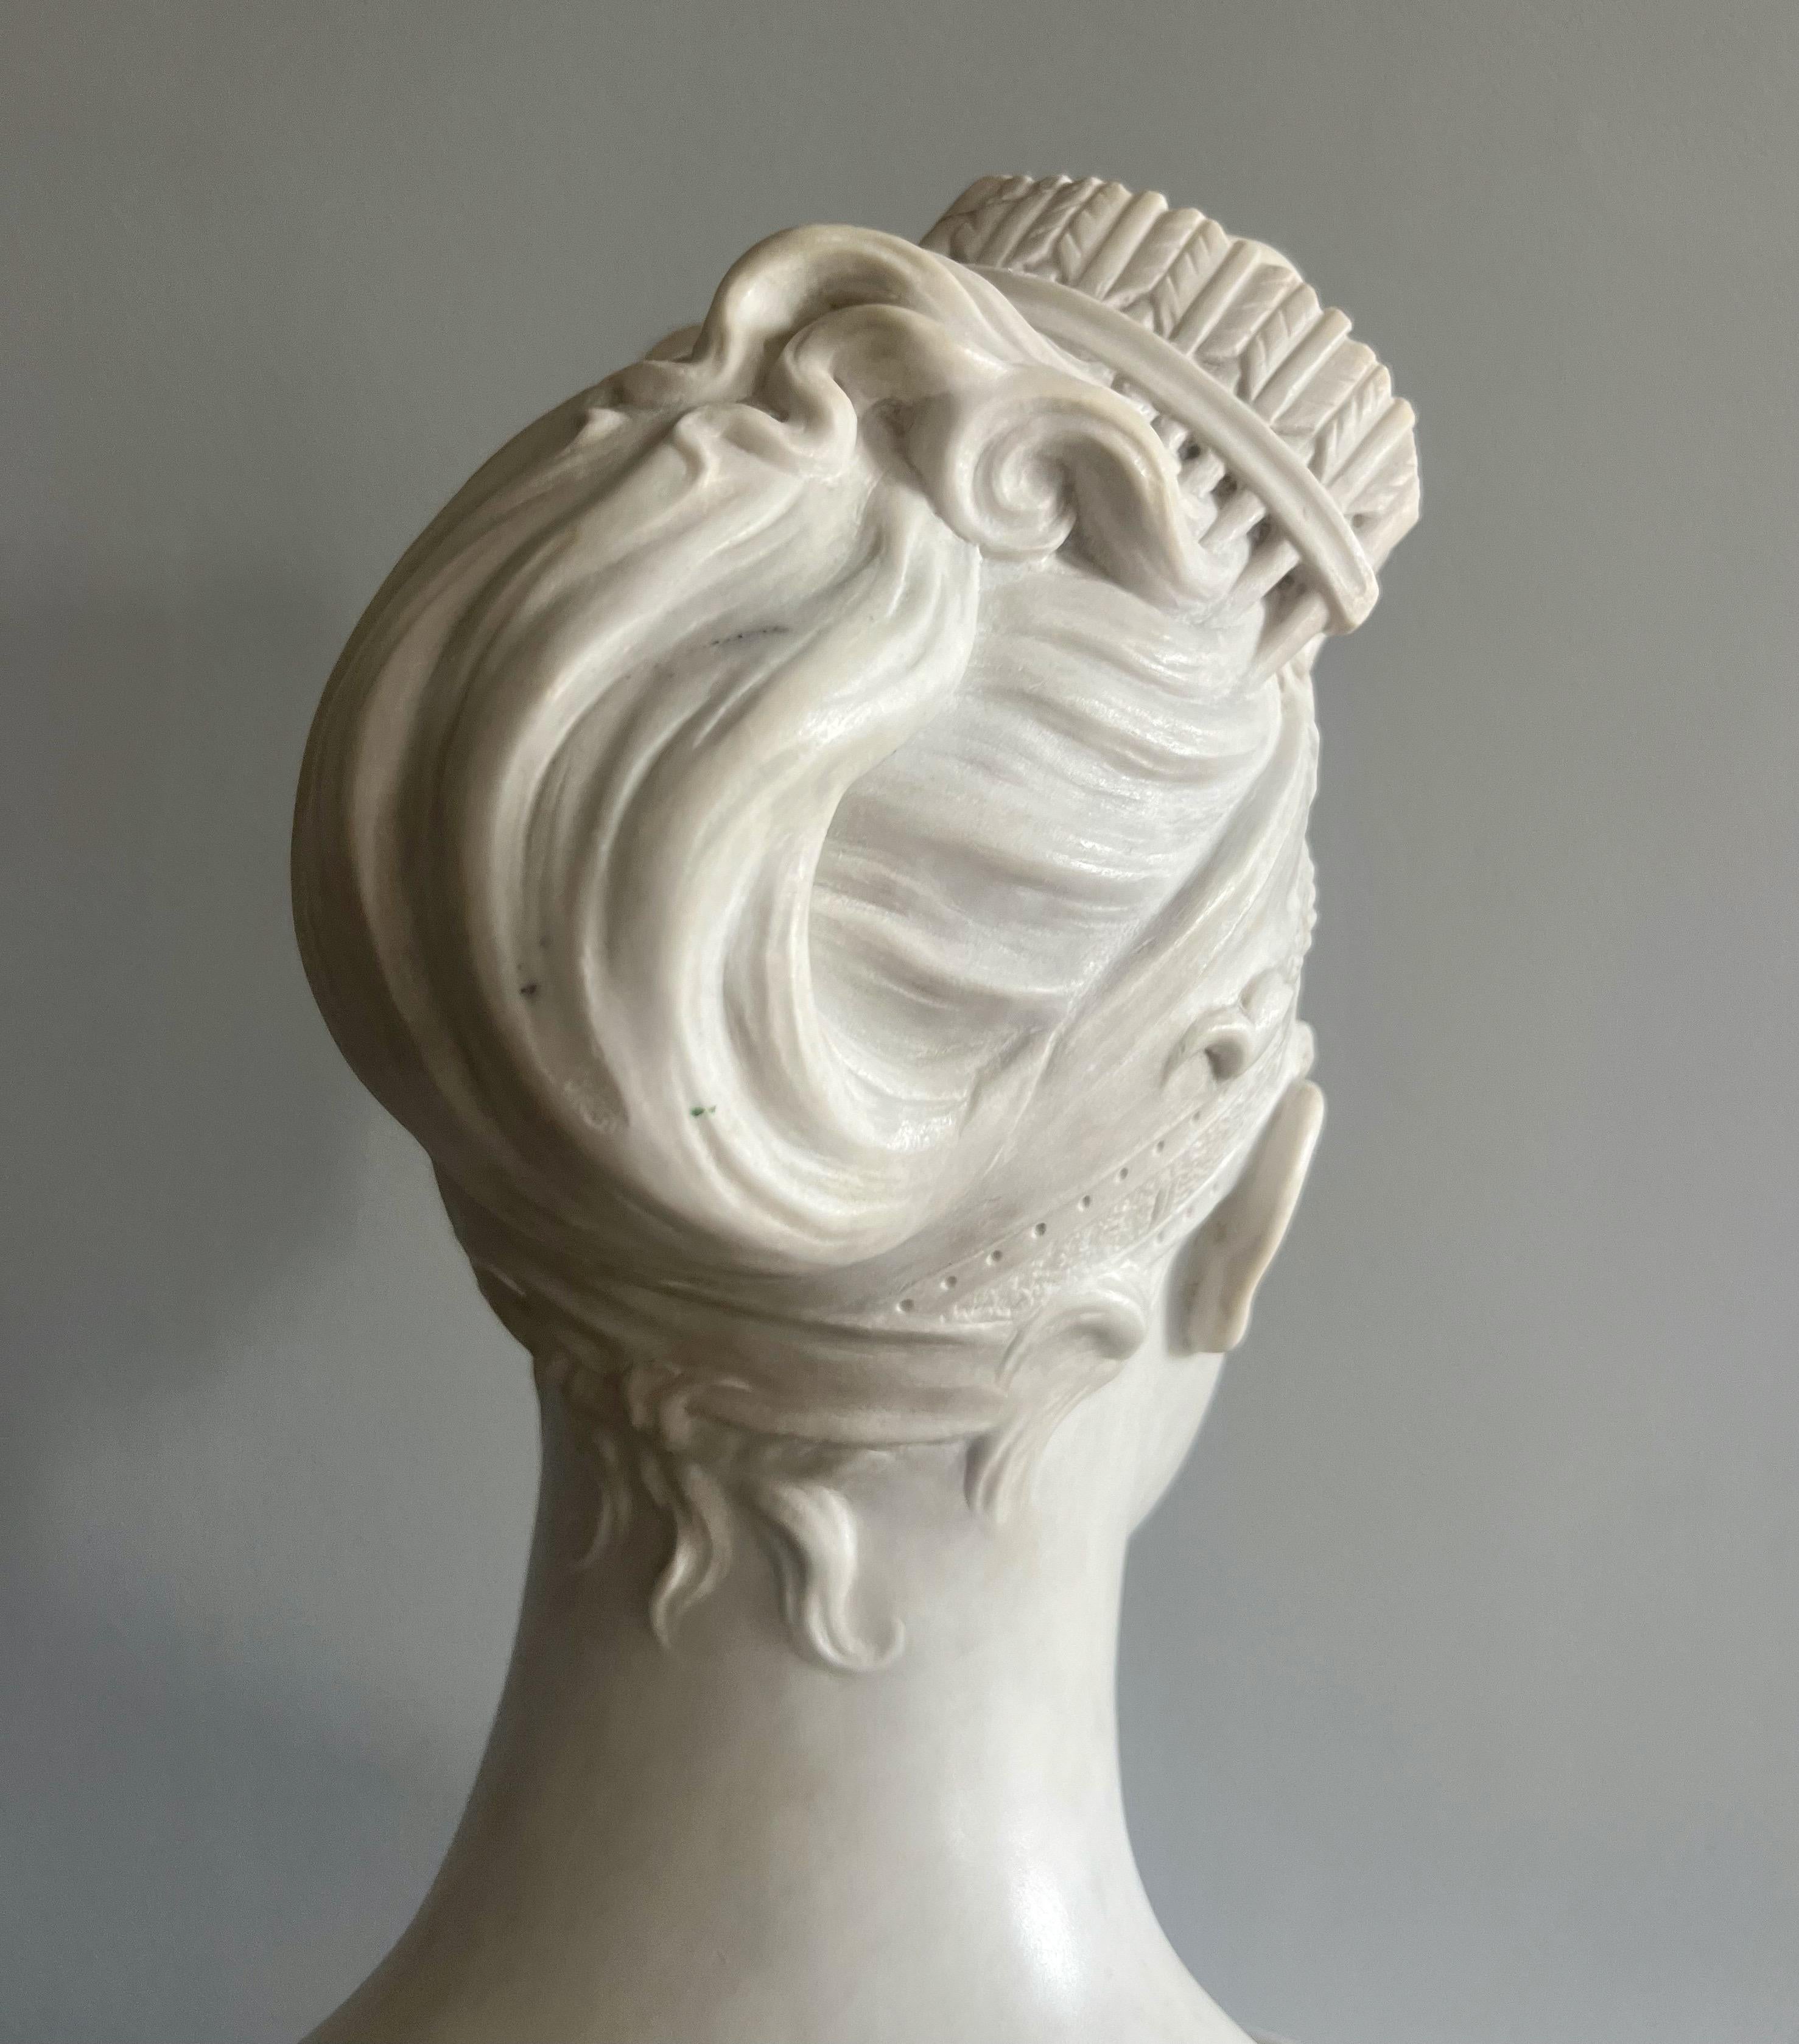 Antique White Marble Sculpture of Madame Recamier  In Good Condition For Sale In Stockholm, SE